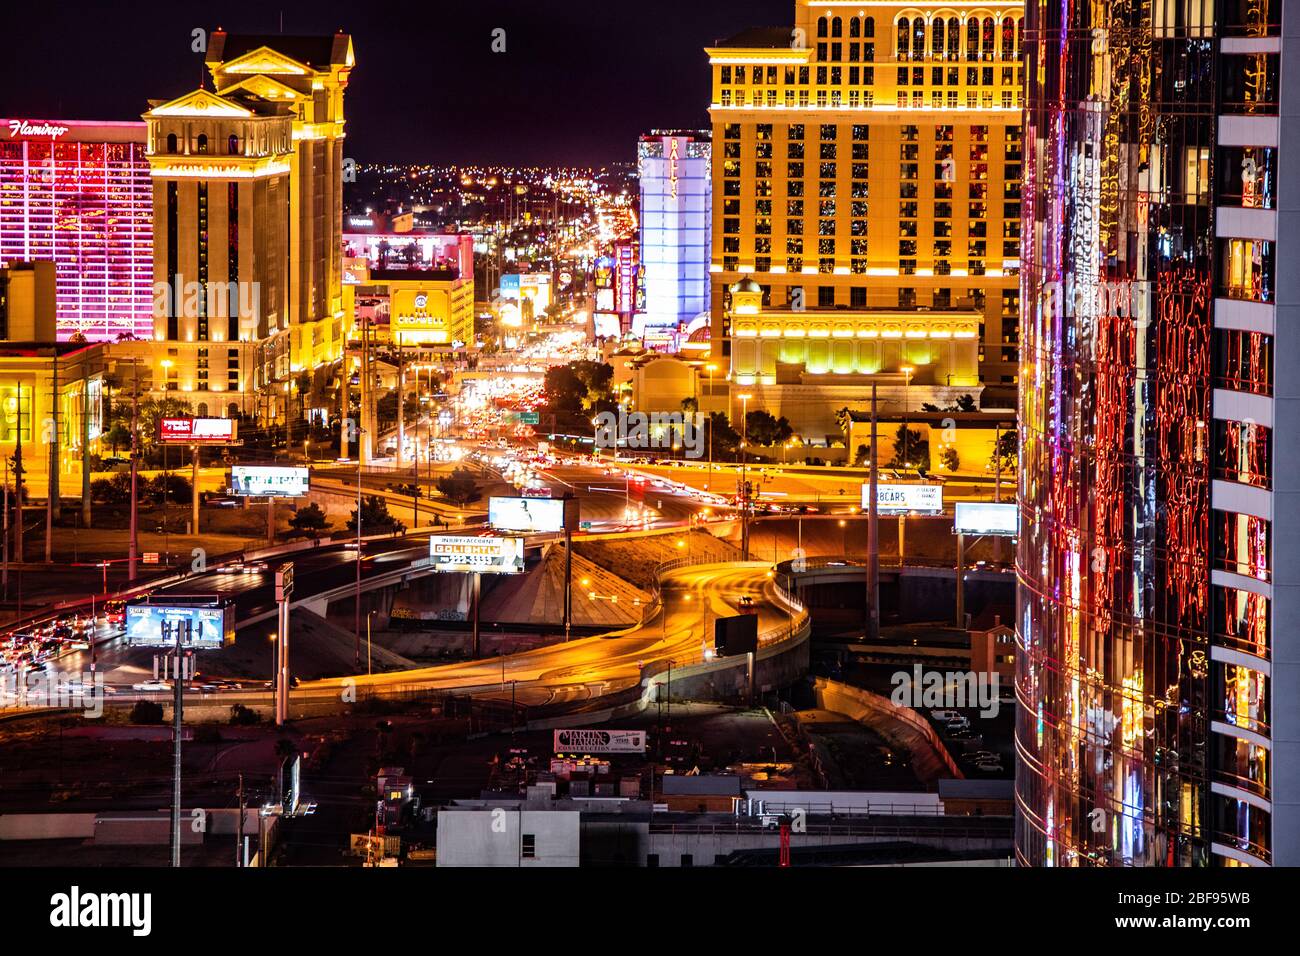 LAS VEGAS, NEVADA - FEBRUARY 23, 2020: Evening view across Las Vegas from above with lights and  resort casino hotels in view. Stock Photo